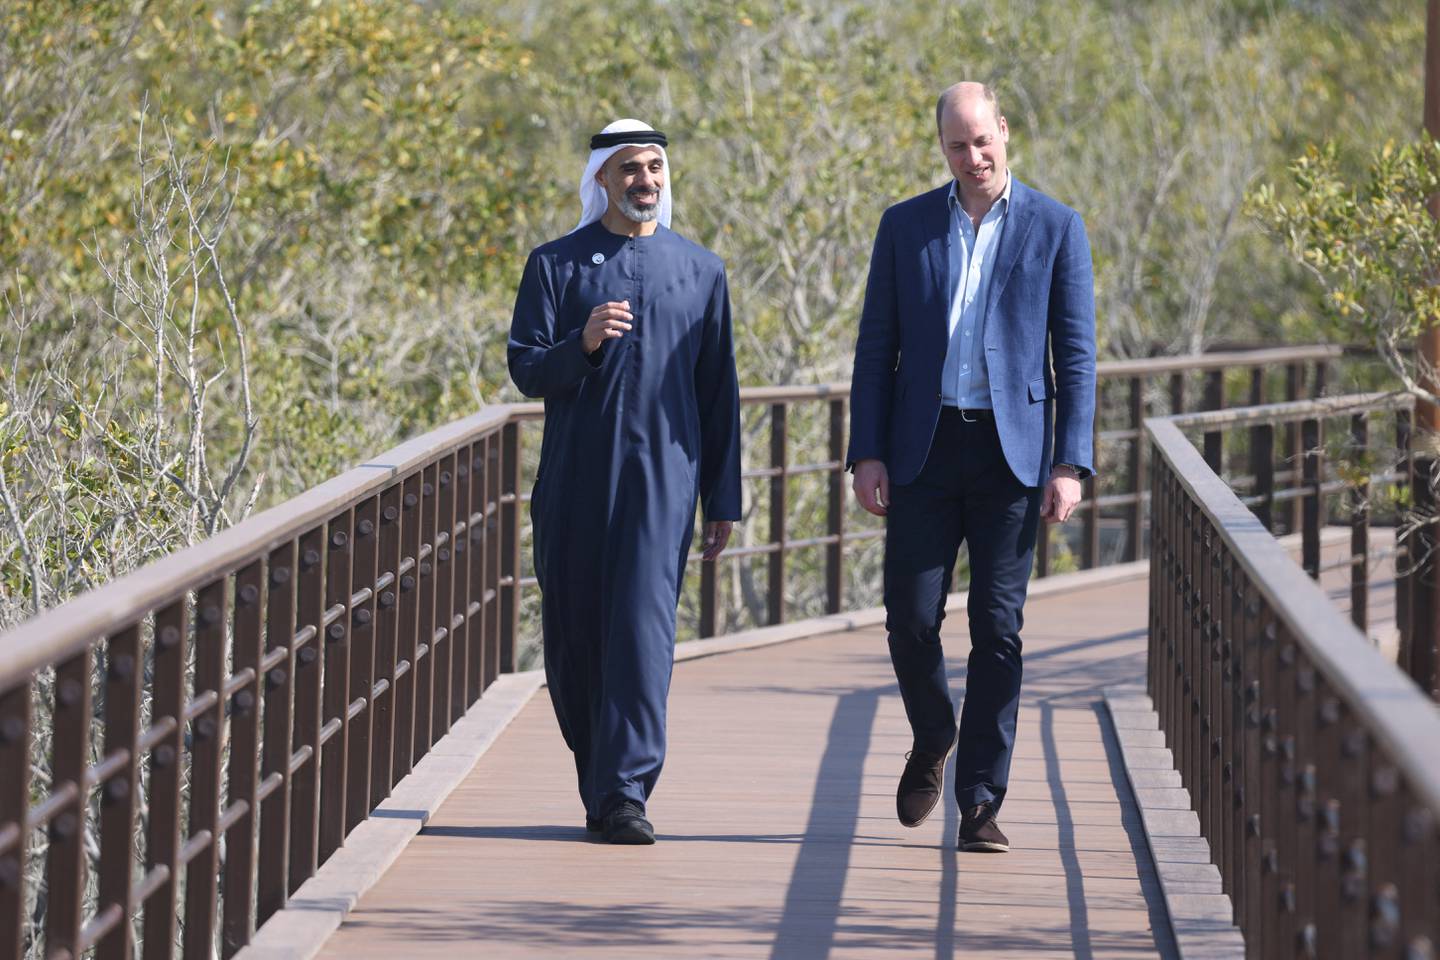 Prince William speaks with Sheikh Khaled bin Mohamed, chairman of Abu Dhabi Executive Office and member of the Abu Dhabi Executive Council, as he visits Jubail Mangrove Park. Reuters